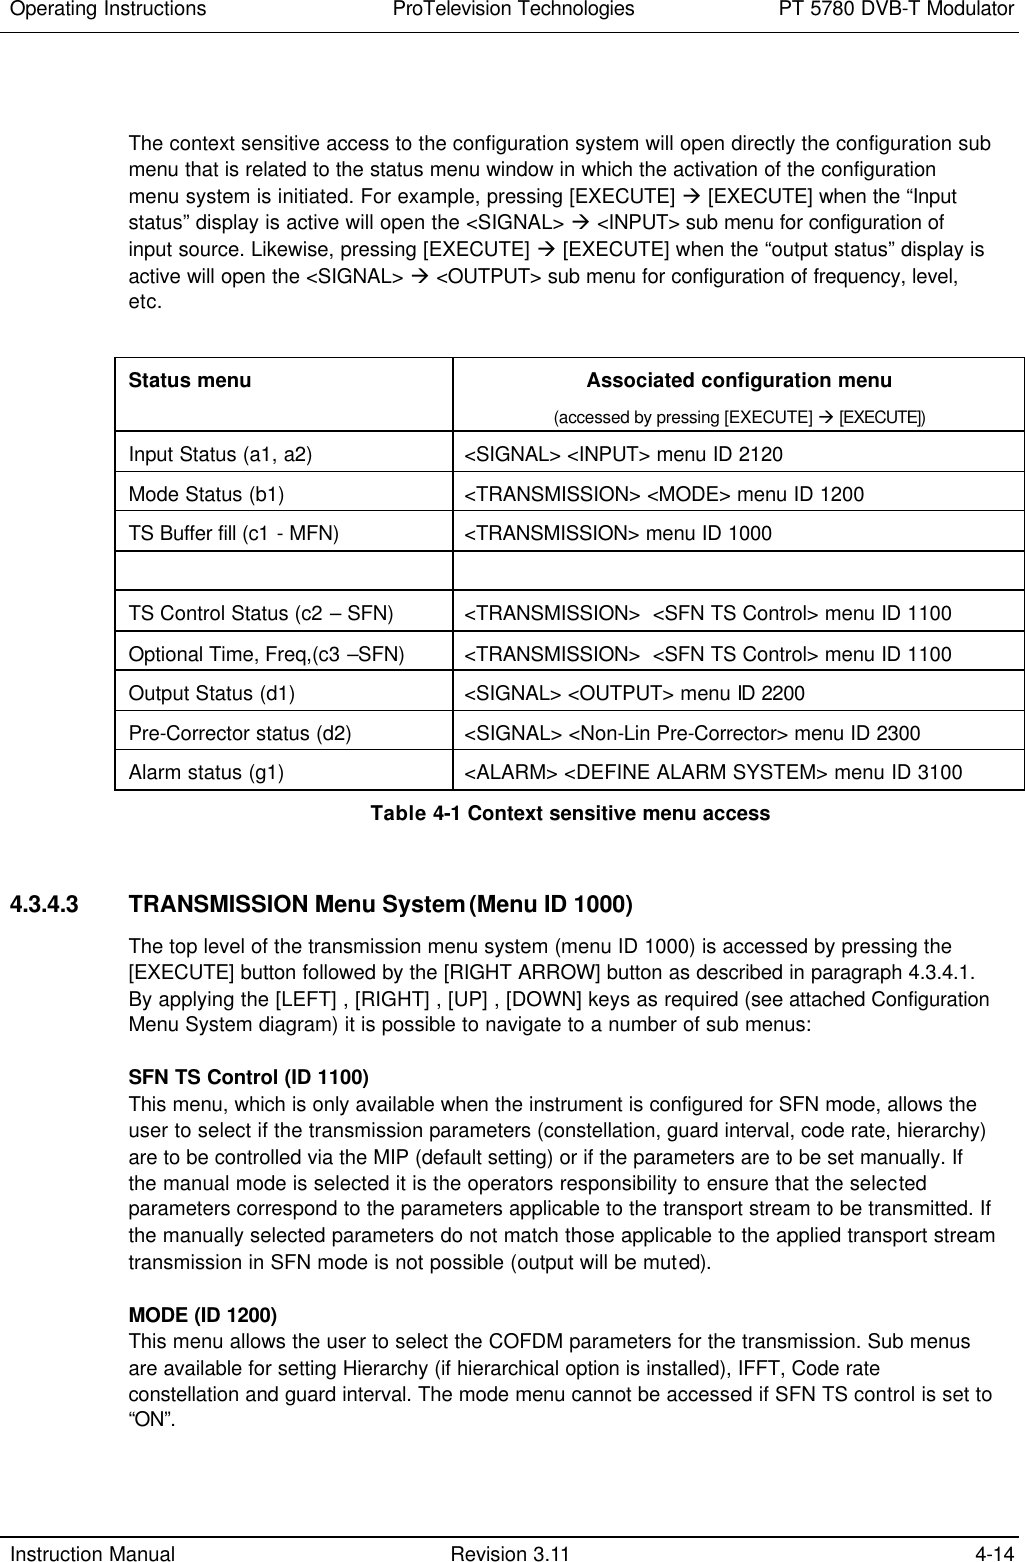 Operating Instructions  ProTelevision Technologies PT 5780 DVB-T Modulator  Instruction Manual Revision 3.11 4-14   The context sensitive access to the configuration system will open directly the configuration sub menu that is related to the status menu window in which the activation of the configuration menu system is initiated. For example, pressing [EXECUTE] à [EXECUTE] when the “Input status” display is active will open the &lt;SIGNAL&gt; à &lt;INPUT&gt; sub menu for configuration of input source. Likewise, pressing [EXECUTE] à [EXECUTE] when the “output status” display is active will open the &lt;SIGNAL&gt; à &lt;OUTPUT&gt; sub menu for configuration of frequency, level, etc.  Status menu Associated configuration menu (accessed by pressing [EXECUTE] à [EXECUTE]) Input Status (a1, a2) &lt;SIGNAL&gt; &lt;INPUT&gt; menu ID 2120 Mode Status (b1) &lt;TRANSMISSION&gt; &lt;MODE&gt; menu ID 1200 TS Buffer fill (c1 - MFN) &lt;TRANSMISSION&gt; menu ID 1000    TS Control Status (c2 – SFN) &lt;TRANSMISSION&gt;  &lt;SFN TS Control&gt; menu ID 1100 Optional Time, Freq,(c3 –SFN) &lt;TRANSMISSION&gt;  &lt;SFN TS Control&gt; menu ID 1100 Output Status (d1) &lt;SIGNAL&gt; &lt;OUTPUT&gt; menu ID 2200 Pre-Corrector status (d2) &lt;SIGNAL&gt; &lt;Non-Lin Pre-Corrector&gt; menu ID 2300 Alarm status (g1) &lt;ALARM&gt; &lt;DEFINE ALARM SYSTEM&gt; menu ID 3100 Table 4-1 Context sensitive menu access   4.3.4.3 TRANSMISSION Menu System (Menu ID 1000) The top level of the transmission menu system (menu ID 1000) is accessed by pressing the [EXECUTE] button followed by the [RIGHT ARROW] button as described in paragraph 4.3.4.1. By applying the [LEFT] , [RIGHT] , [UP] , [DOWN] keys as required (see attached Configuration Menu System diagram) it is possible to navigate to a number of sub menus:  SFN TS Control (ID 1100) This menu, which is only available when the instrument is configured for SFN mode, allows the user to select if the transmission parameters (constellation, guard interval, code rate, hierarchy) are to be controlled via the MIP (default setting) or if the parameters are to be set manually. If the manual mode is selected it is the operators responsibility to ensure that the selected parameters correspond to the parameters applicable to the transport stream to be transmitted. If the manually selected parameters do not match those applicable to the applied transport stream transmission in SFN mode is not possible (output will be muted).  MODE (ID 1200) This menu allows the user to select the COFDM parameters for the transmission. Sub menus are available for setting Hierarchy (if hierarchical option is installed), IFFT, Code rate constellation and guard interval. The mode menu cannot be accessed if SFN TS control is set to “ON”. 